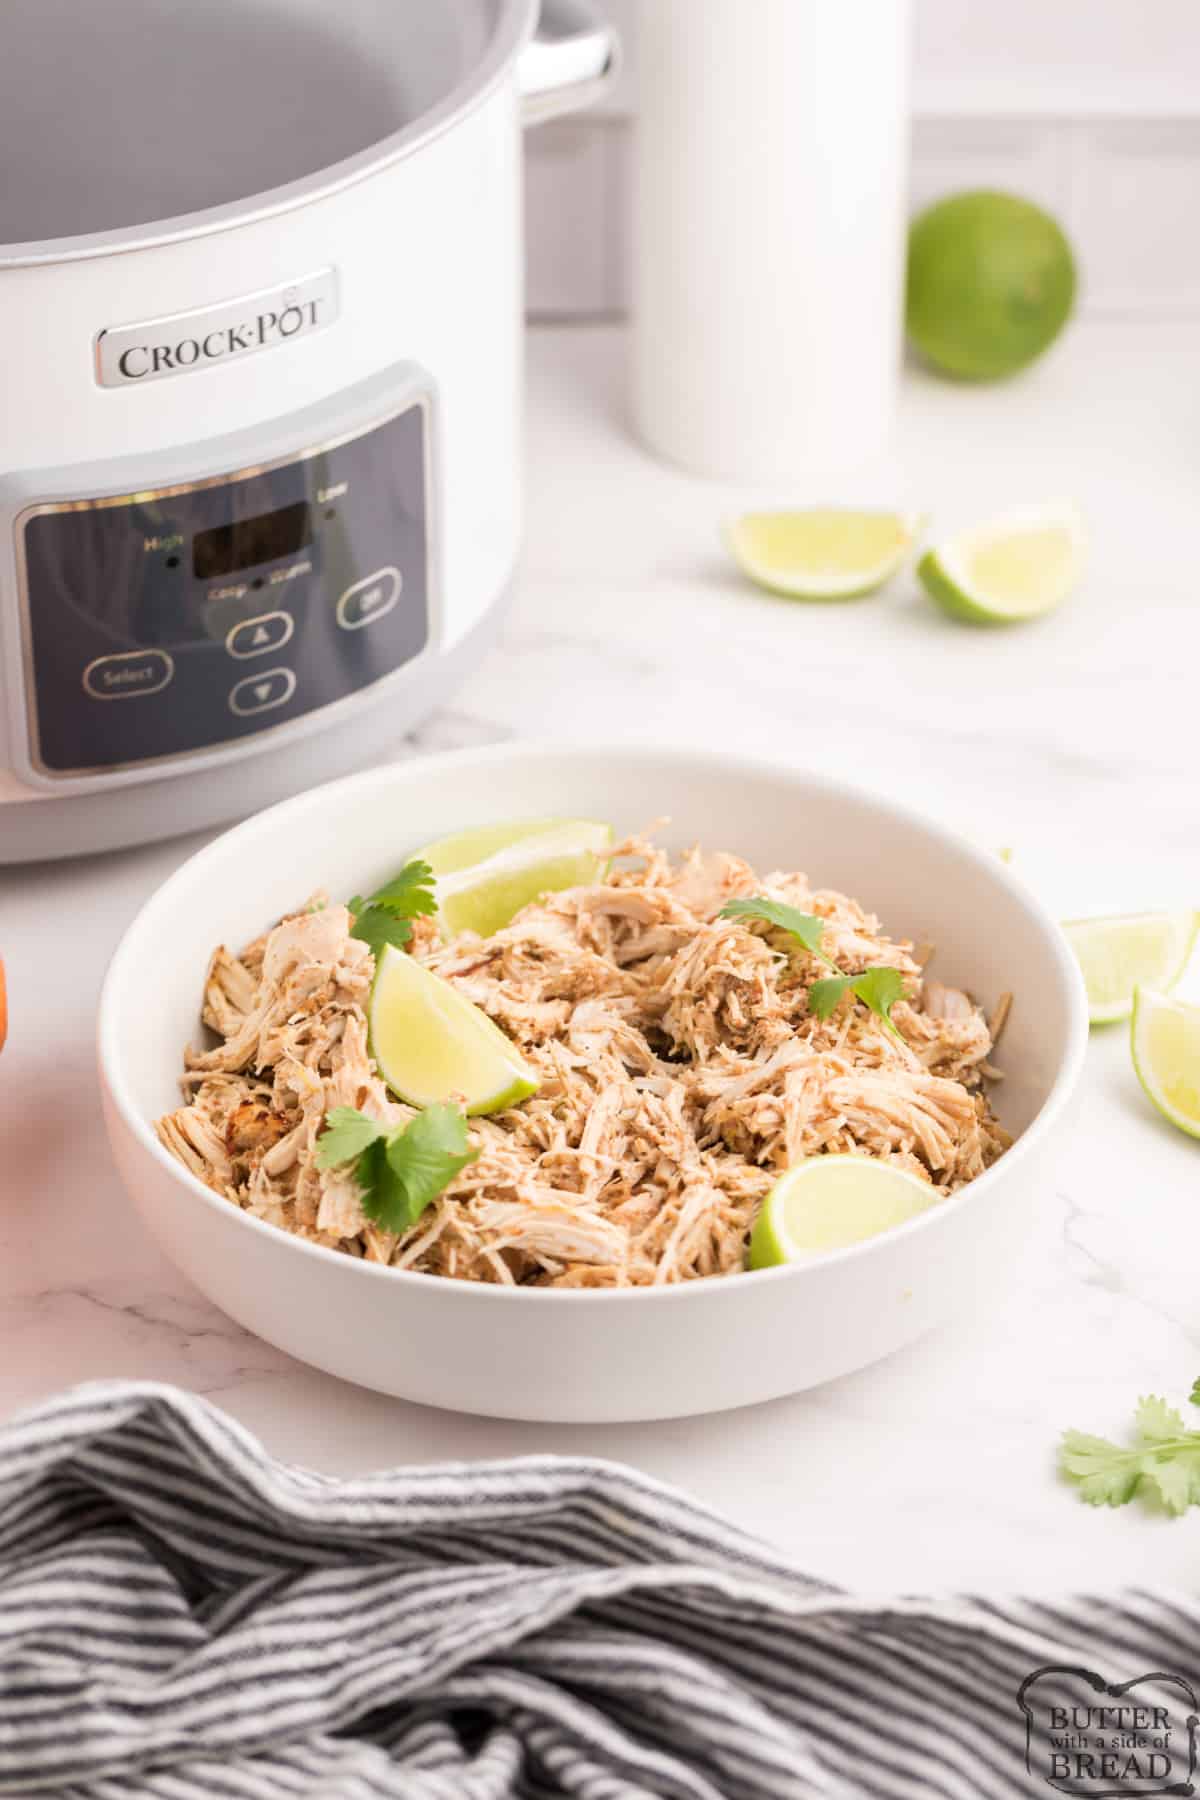 These Slow Cooker Chicken Carnitas are juicy, crispy, and absolutely packed with flavor.  Only 10 minutes of prep to make this delicious and healthy chicken recipe! Quick and easy dinner recipe that everyone loves!